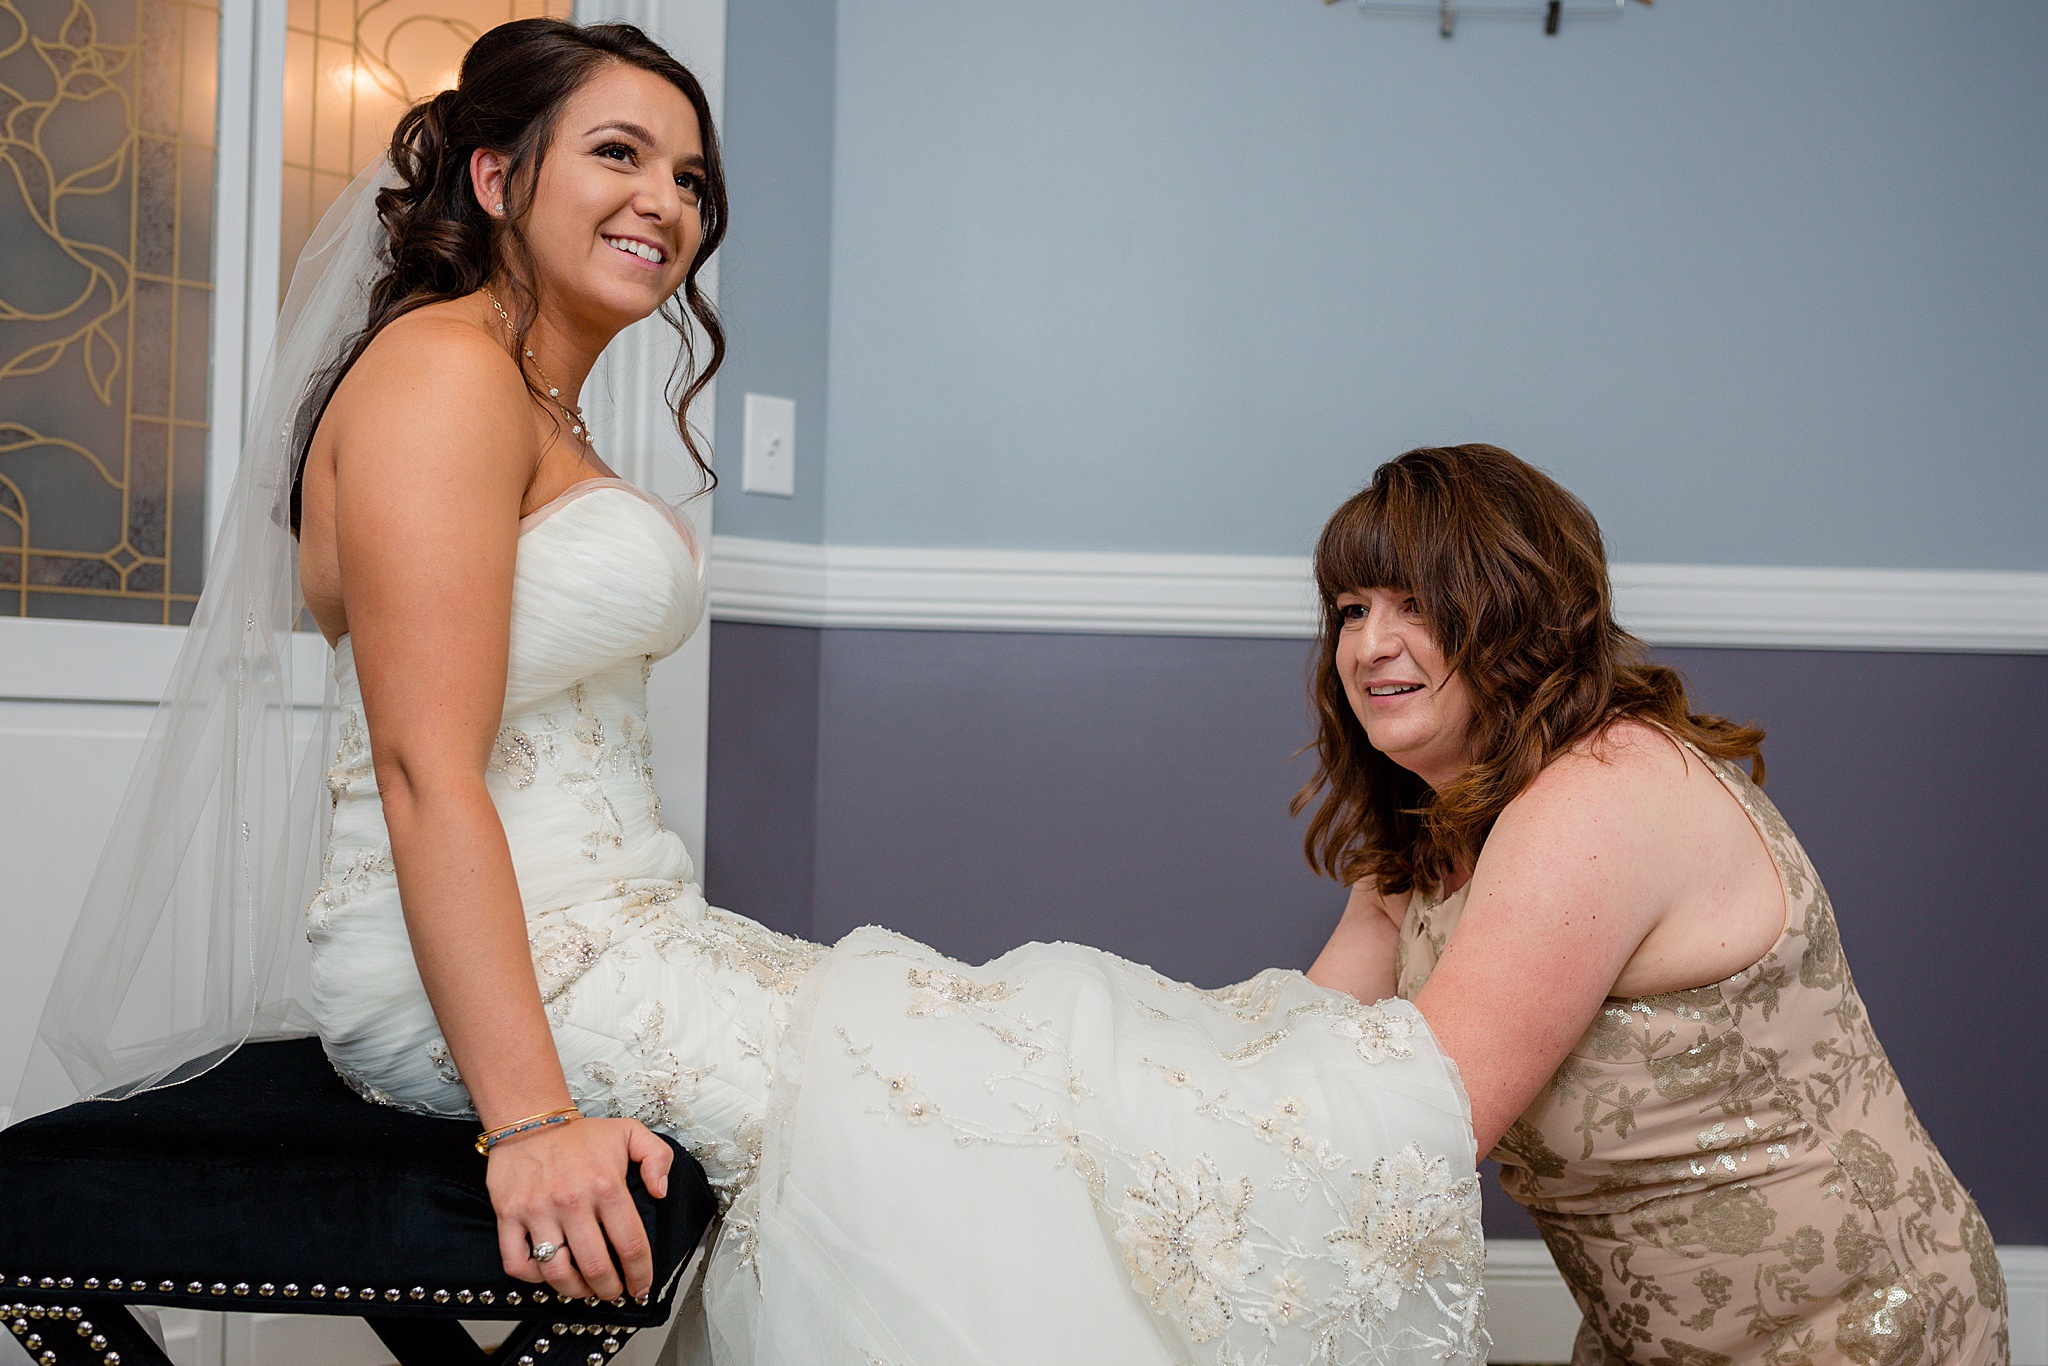 Bride getting ready with her mother before the wedding ceremony. Tania & Chris' Denver Wedding at the Wedgewood Ken Caryl by Colorado Wedding Photography, Jennifer Garza. Colorado Wedding Photographer, Colorado Wedding Photography, Denver Wedding Photographer, Denver Wedding Photography, US Marine Corp Wedding, US Marine Corp, Military Wedding, US Marines, Wedgewood Weddings, Wedgewood Weddings Ken Caryl, Colorado Wedding, Denver Wedding, Wedding Photographer, Colorado Bride, Brides of Colorado